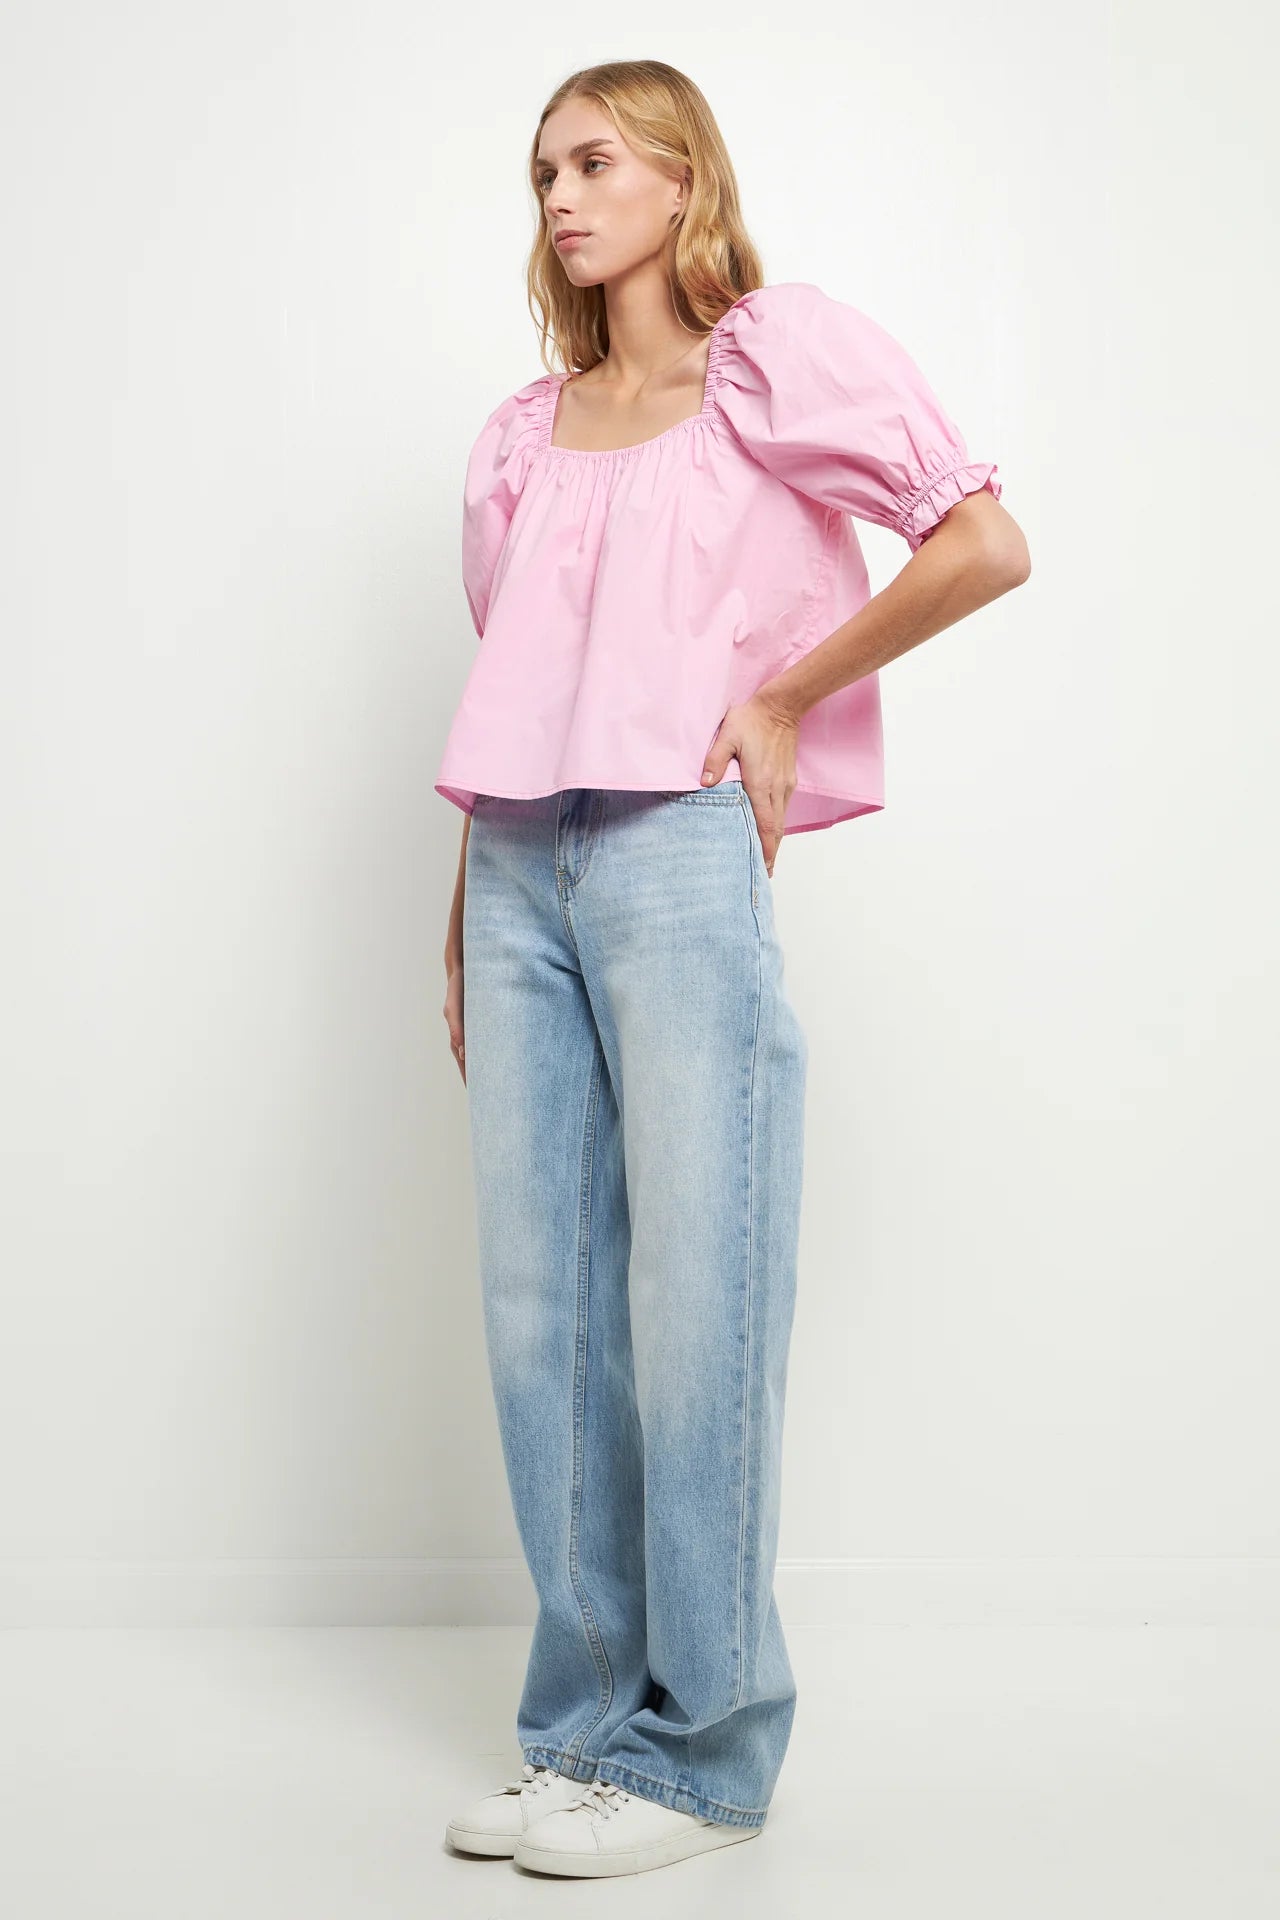 Square Neck Puff Sleeve Top Pink